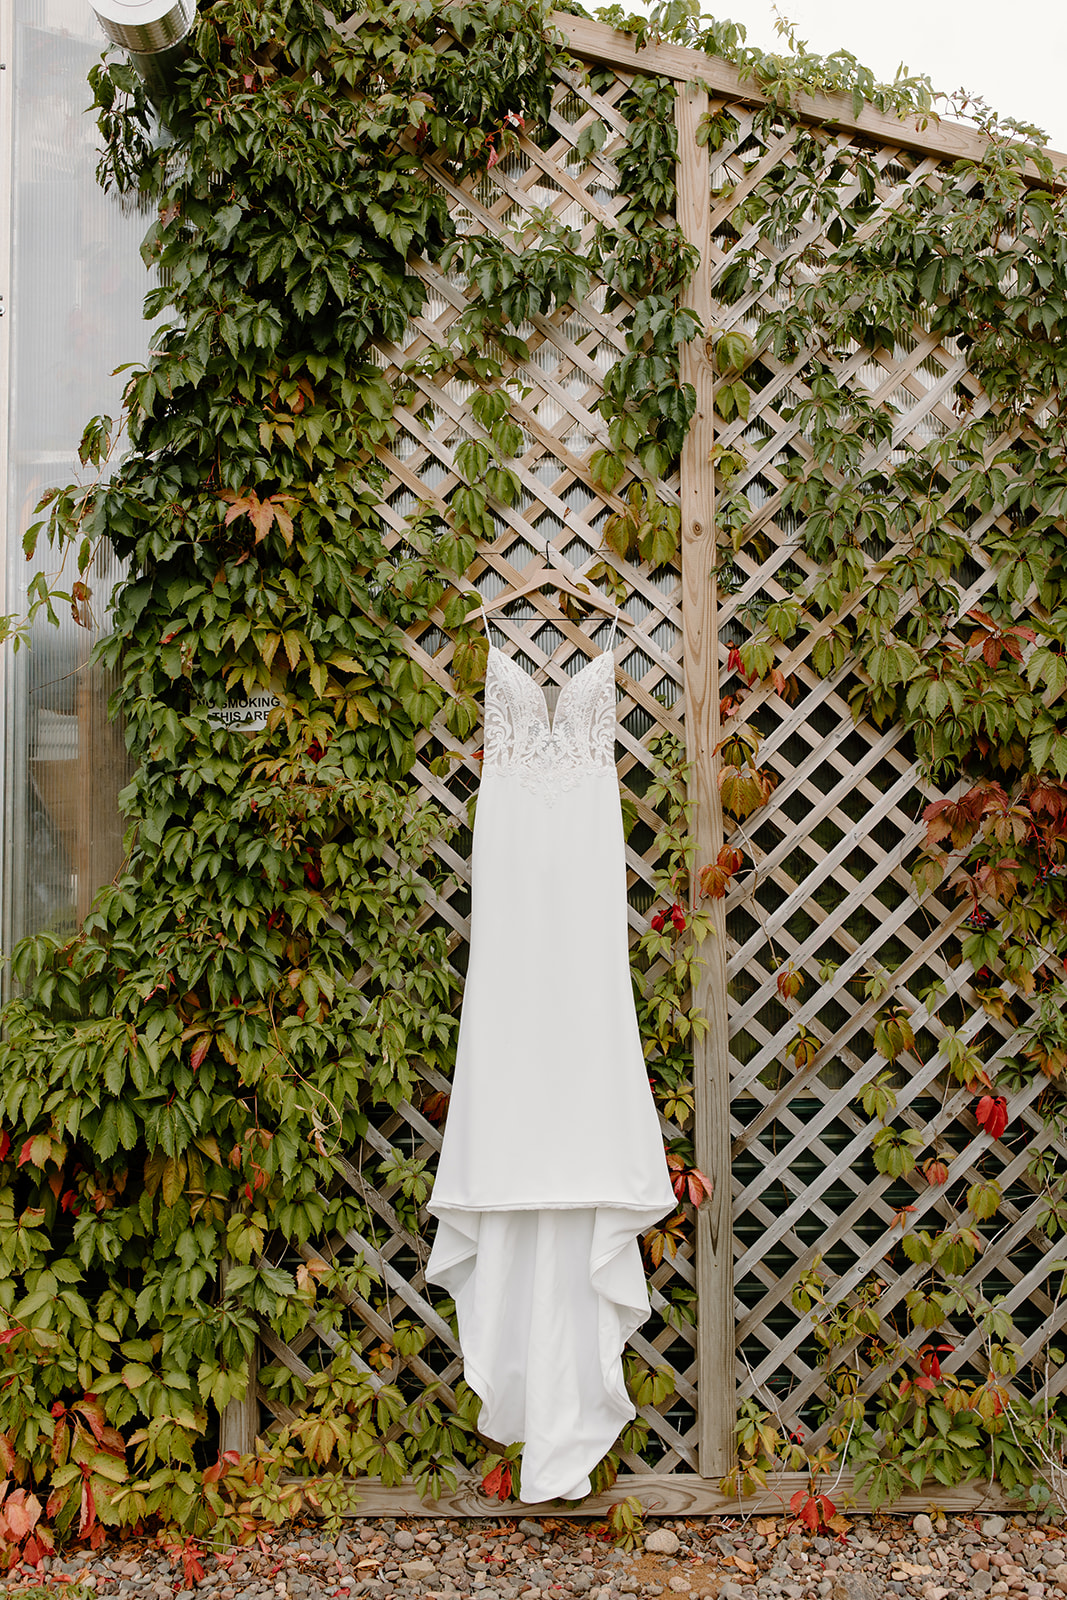 Wedding dress hangs from a lattice covered in vines